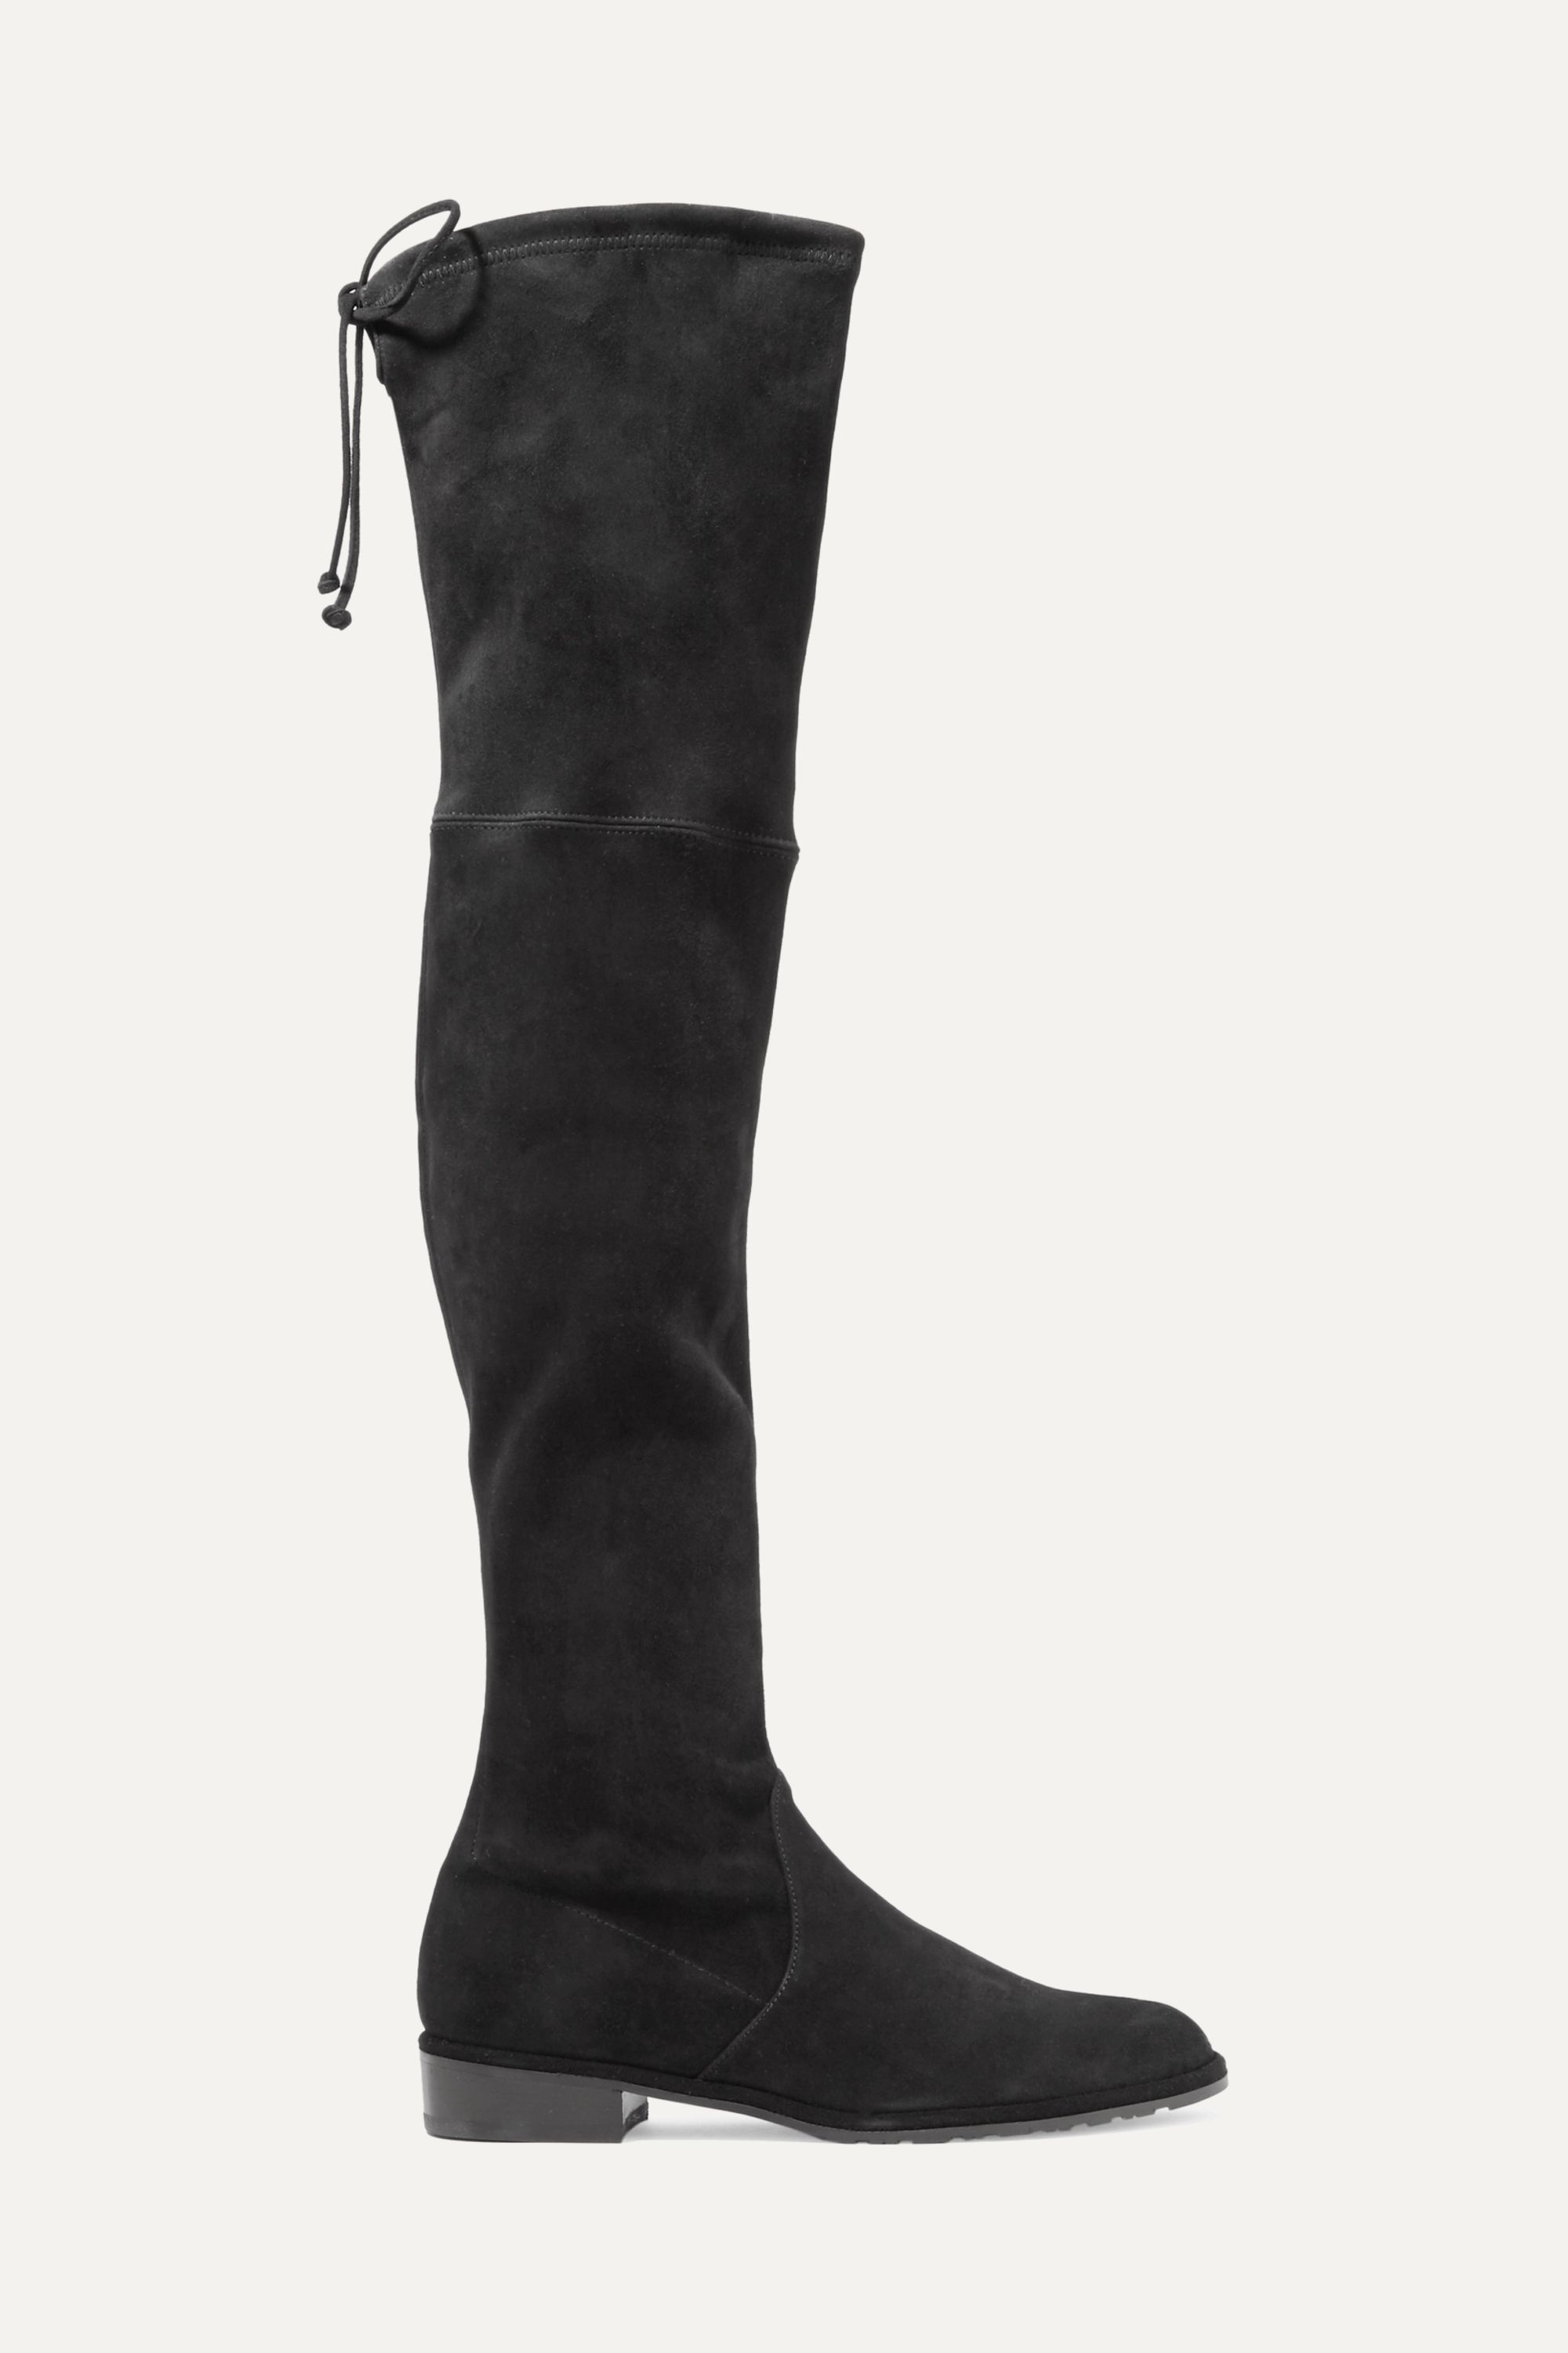 Details about   Chic Women Over The Knee Boots Low Heel Suede Fabric Winter Riding Casual Shoes 